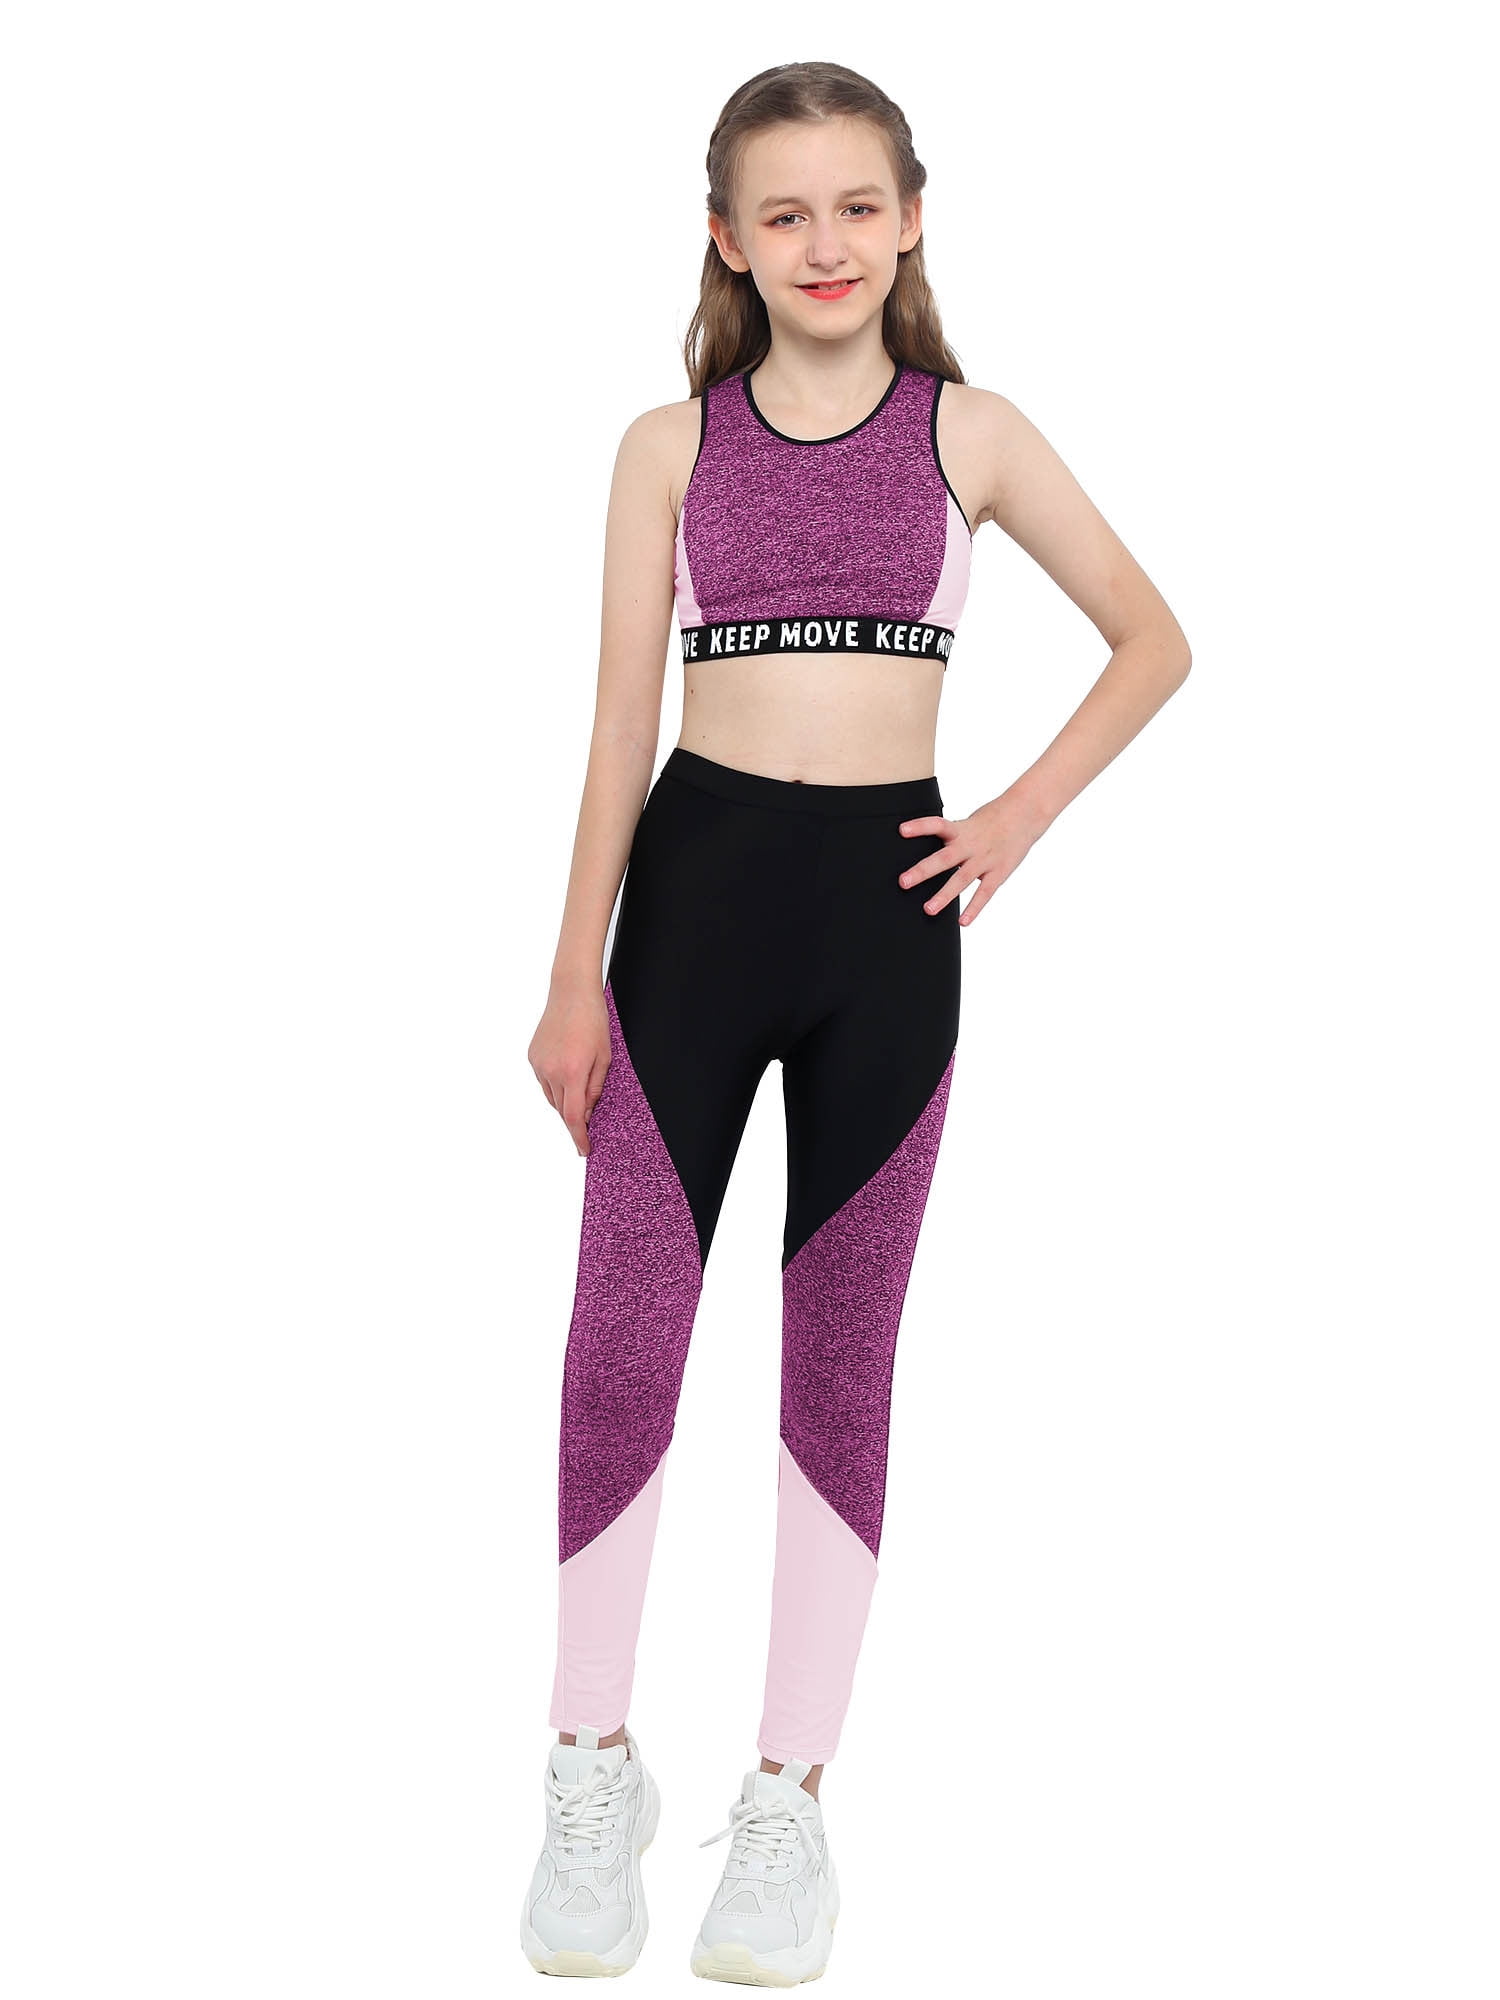 YEAHDOR Kids Girls Activewear Athletic Crop Top with Leggings Gym Sports  Suit Outfit Set 